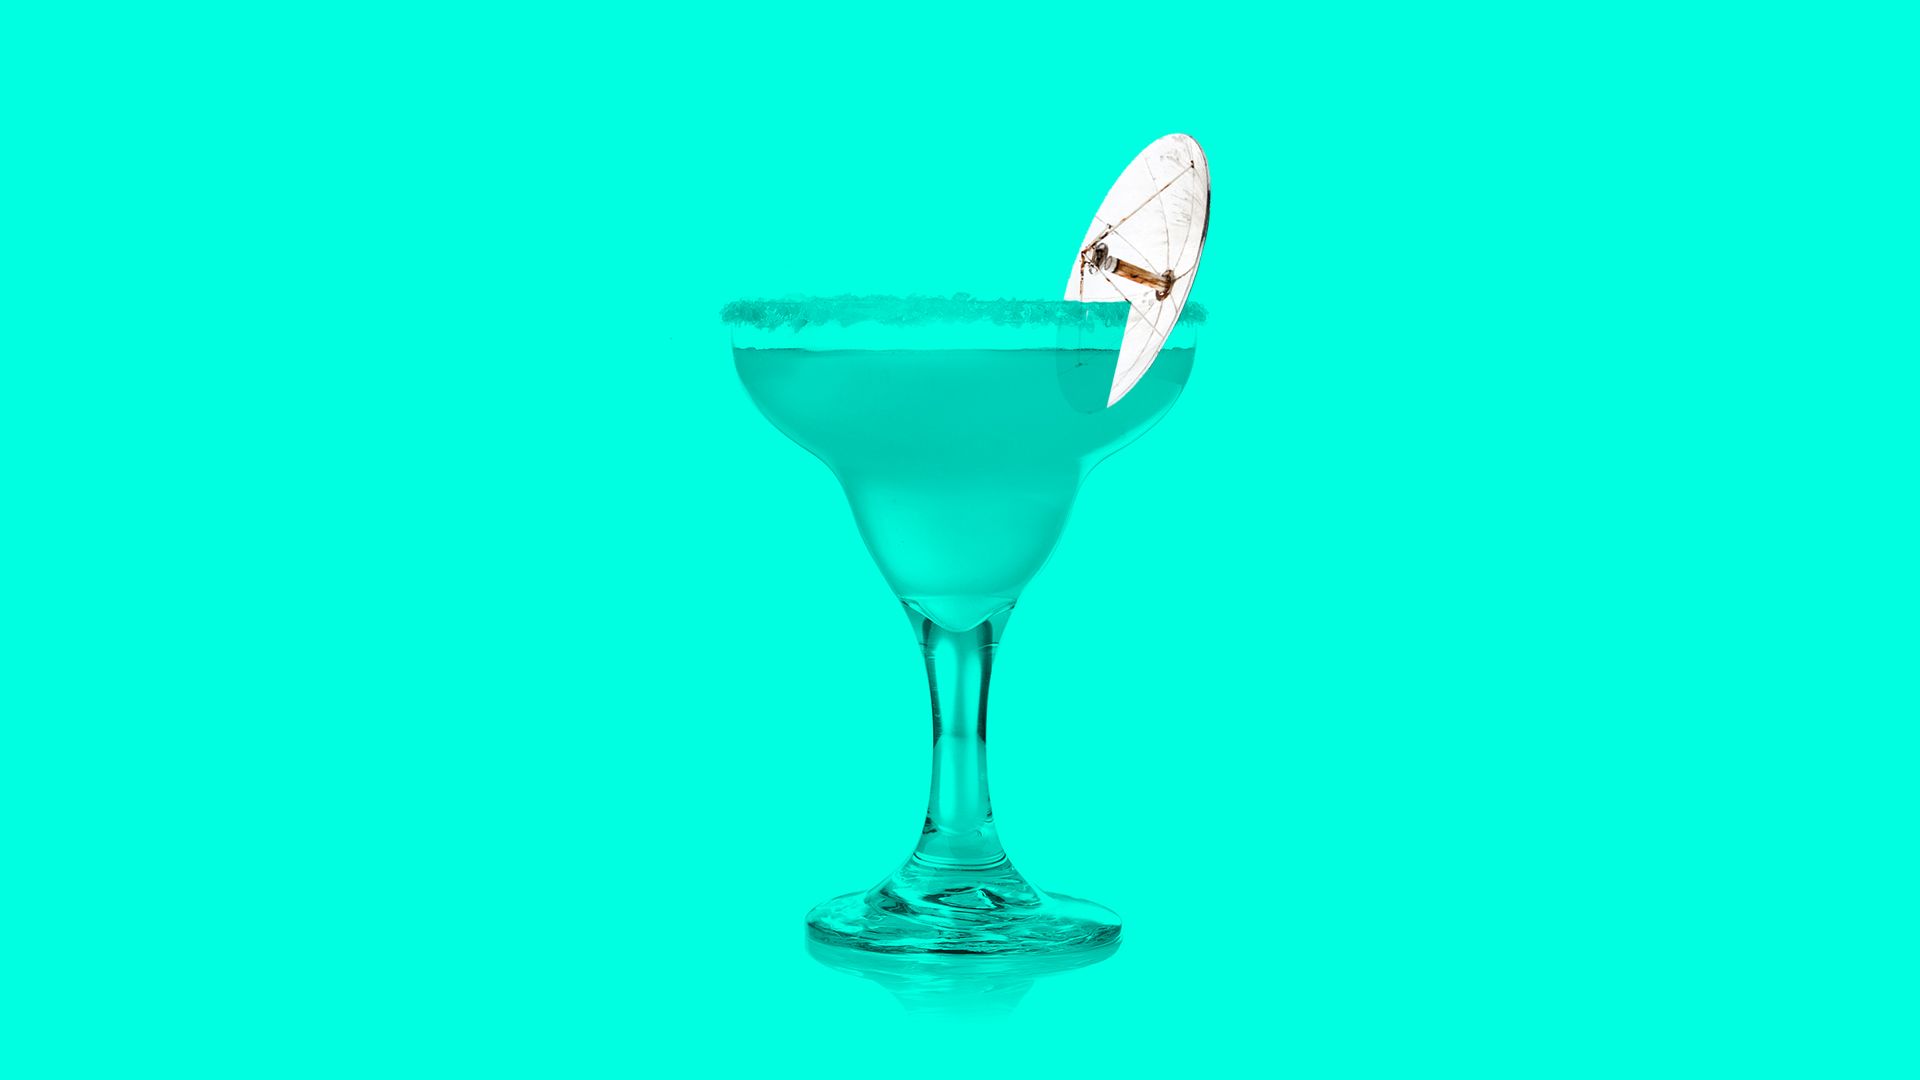 Illustration of a satellite dish on the side of a cocktail glass